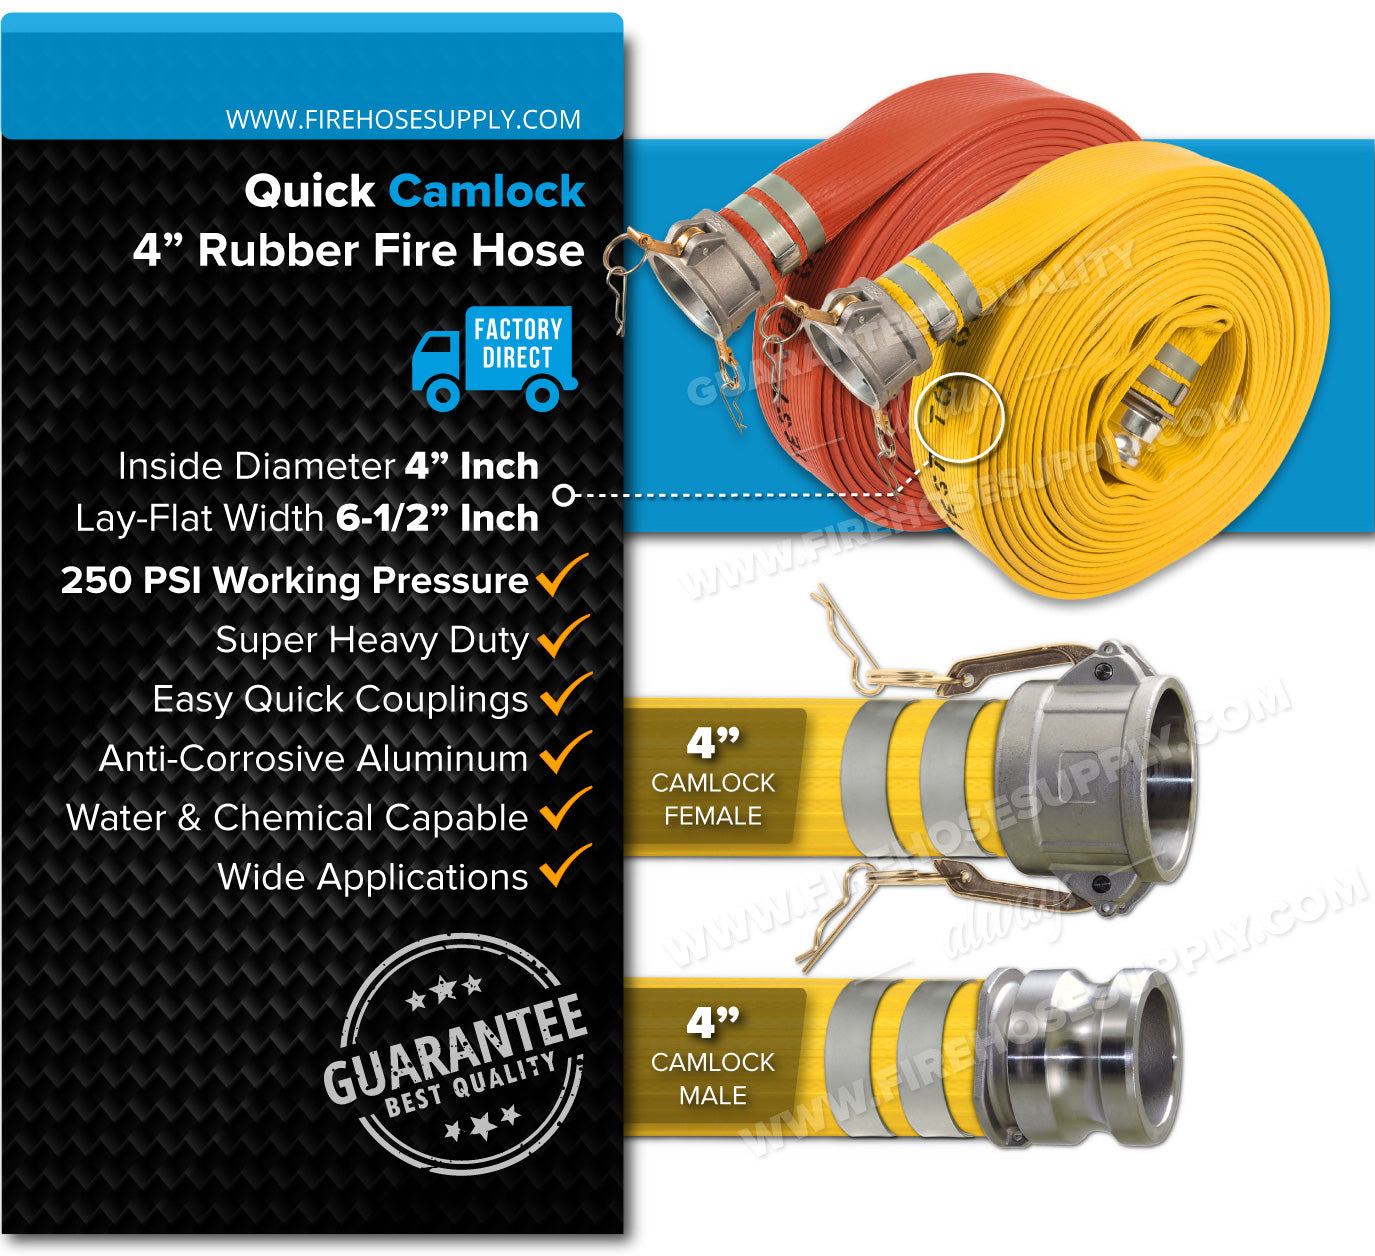 4 Inch Rubber Camlock Fire Hose Overview